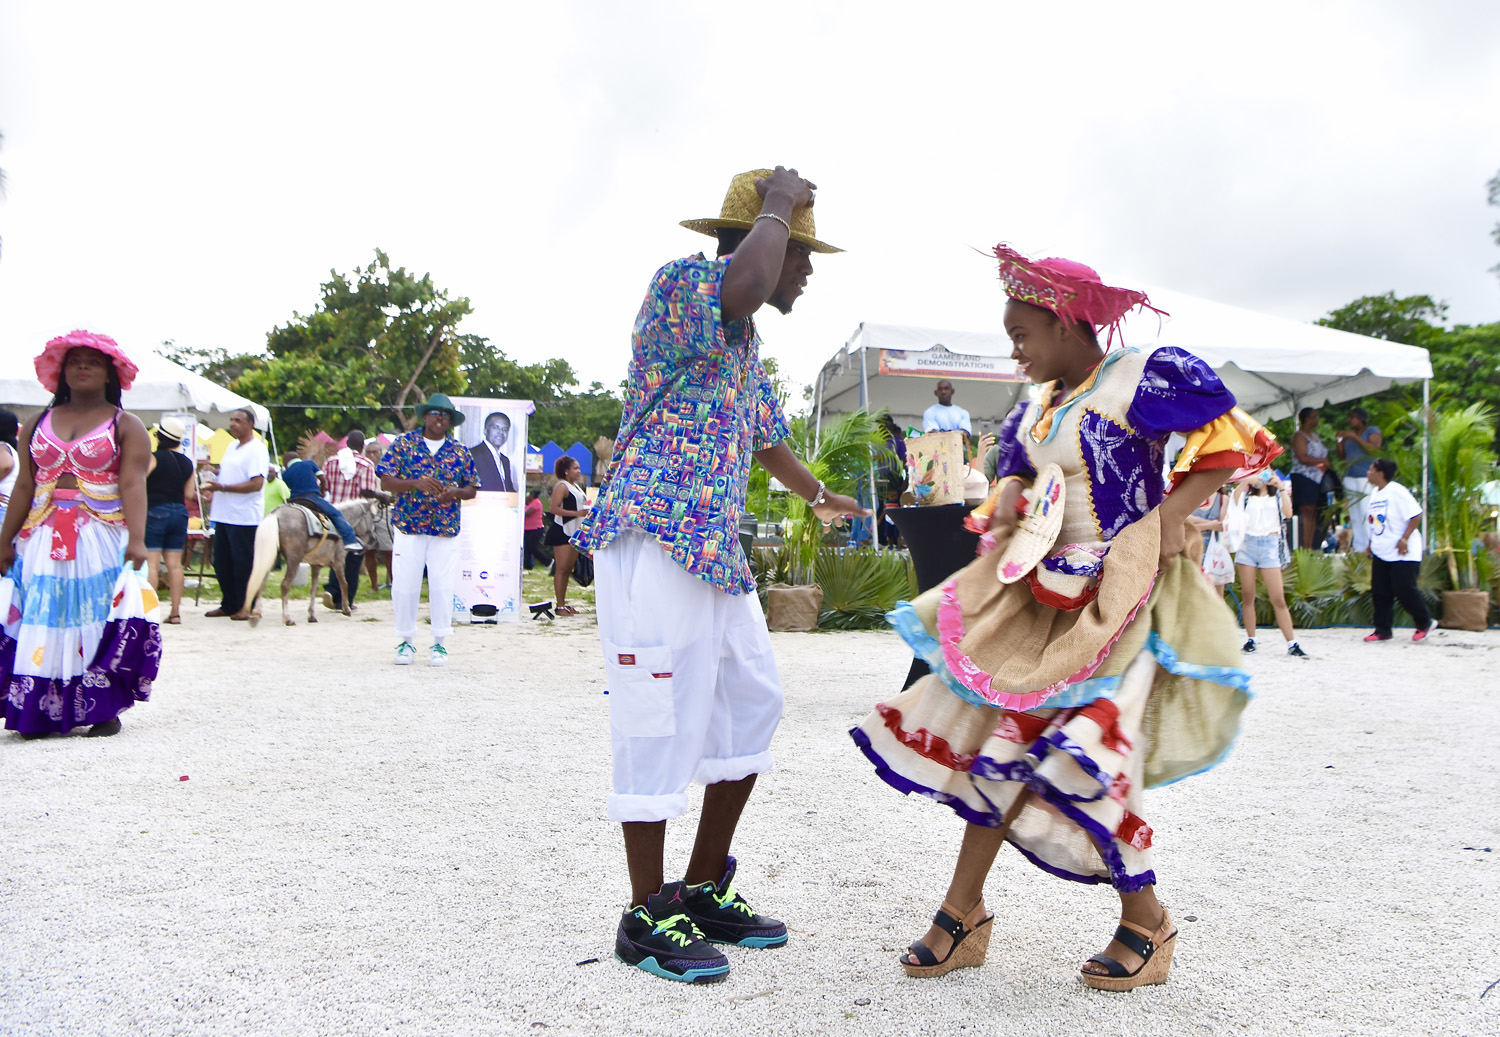 Dancers at the Goombay Summer Festival.